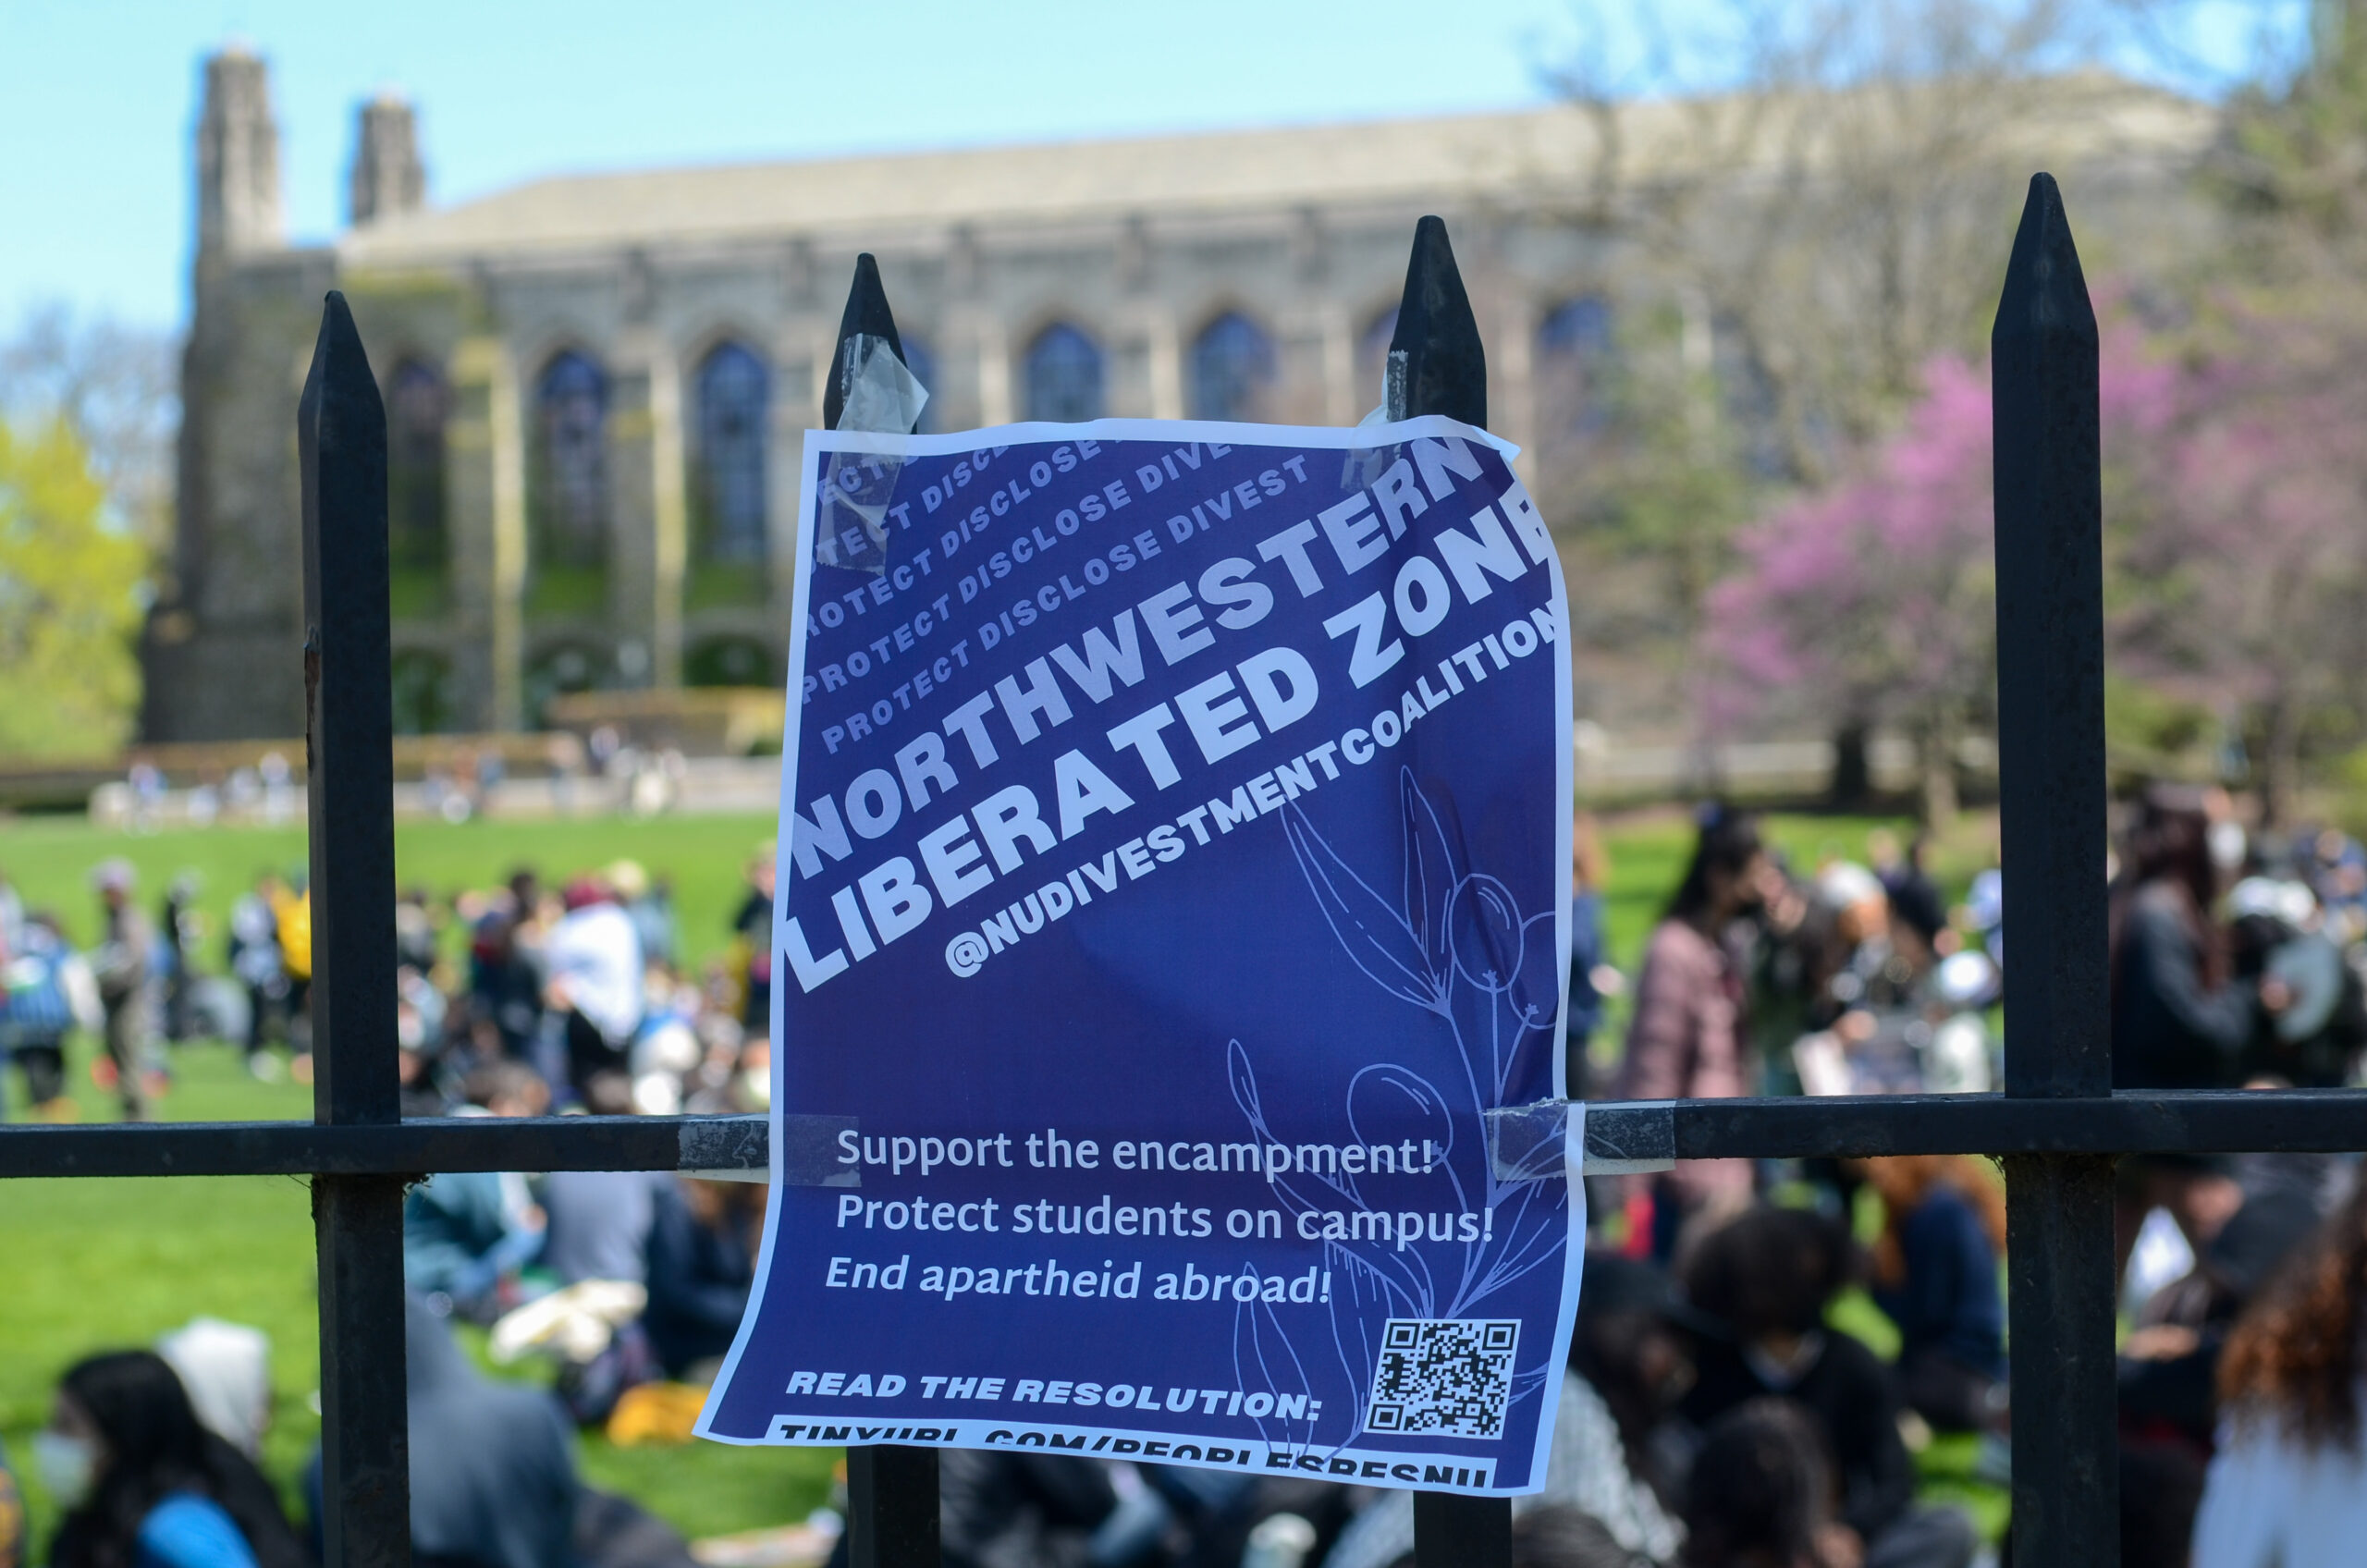 Legal actions taken against Northwestern University after reaching a deal with anti-Israel protesters